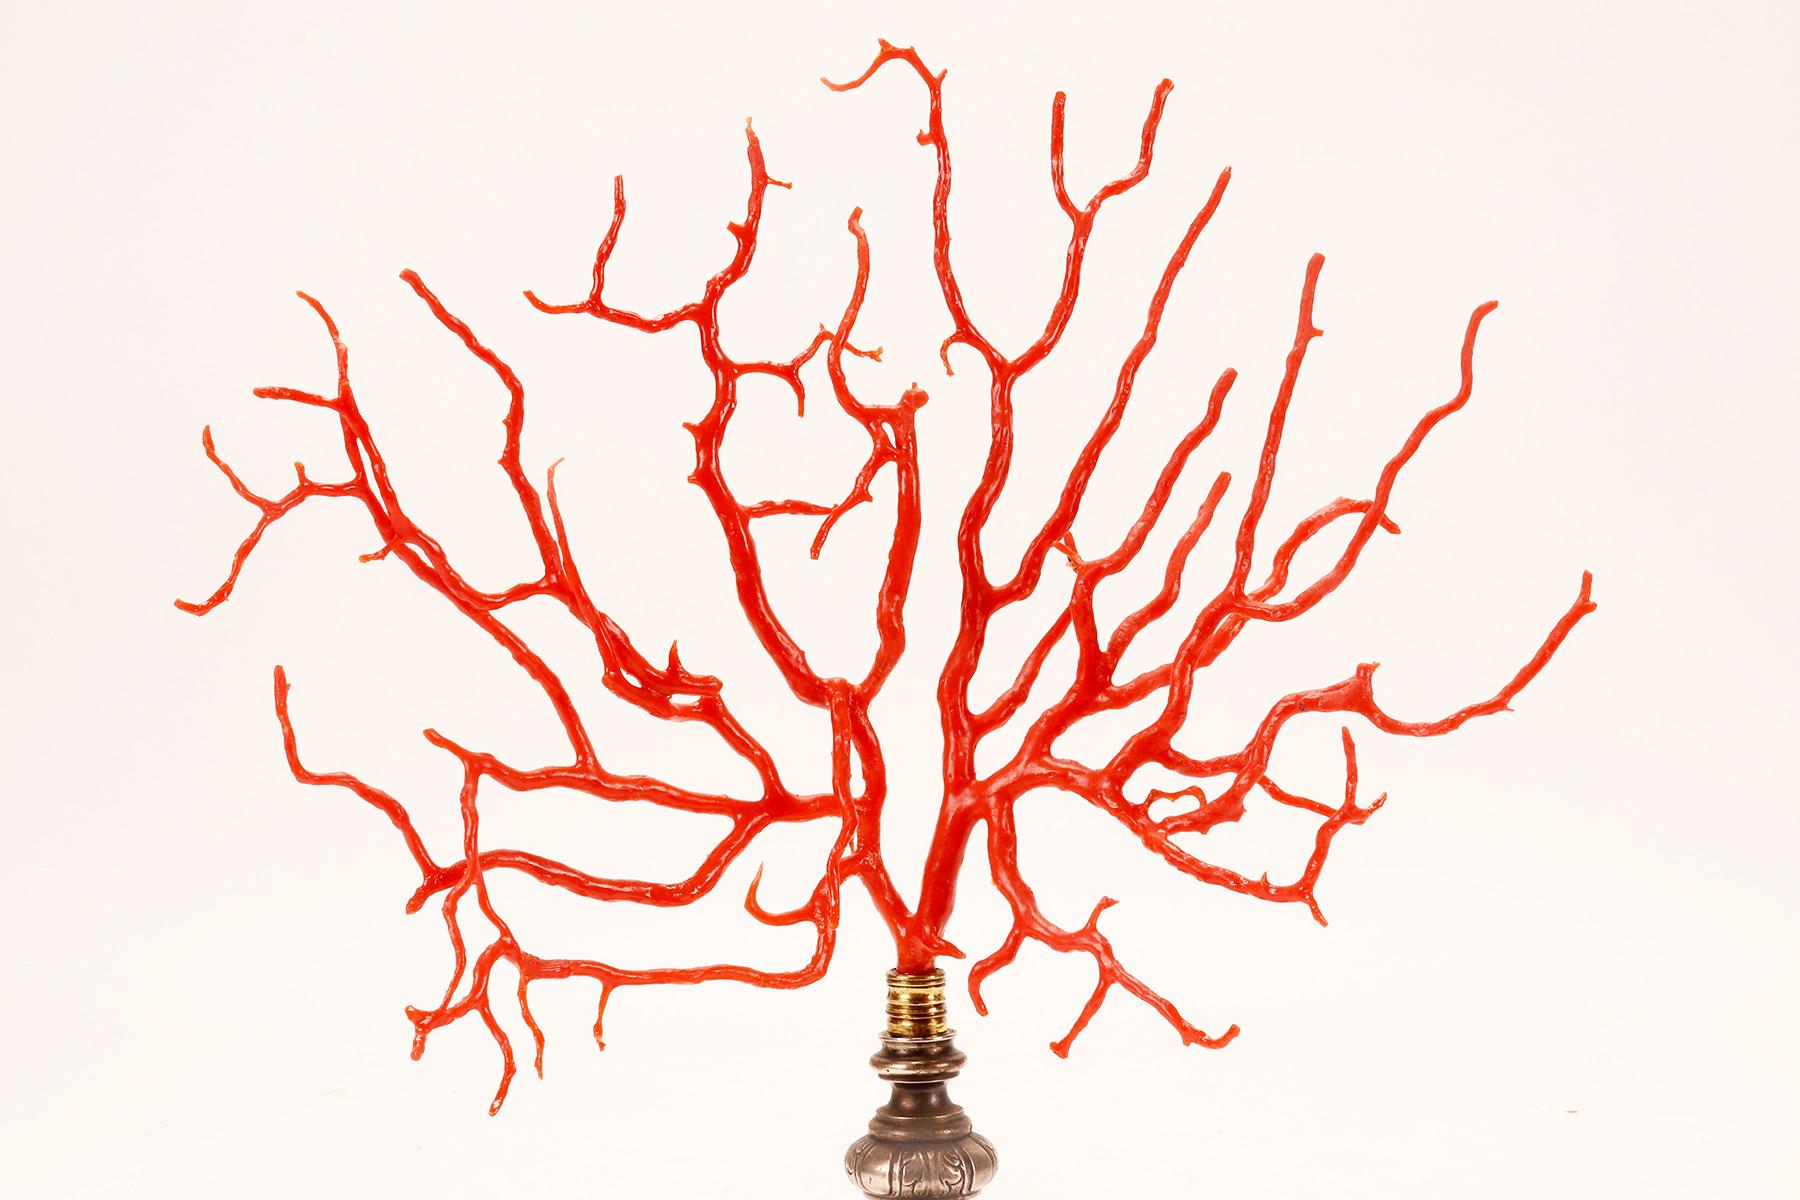 Silver A big red coral branch from Wunderkammer, silver base, Italy 1820.  For Sale